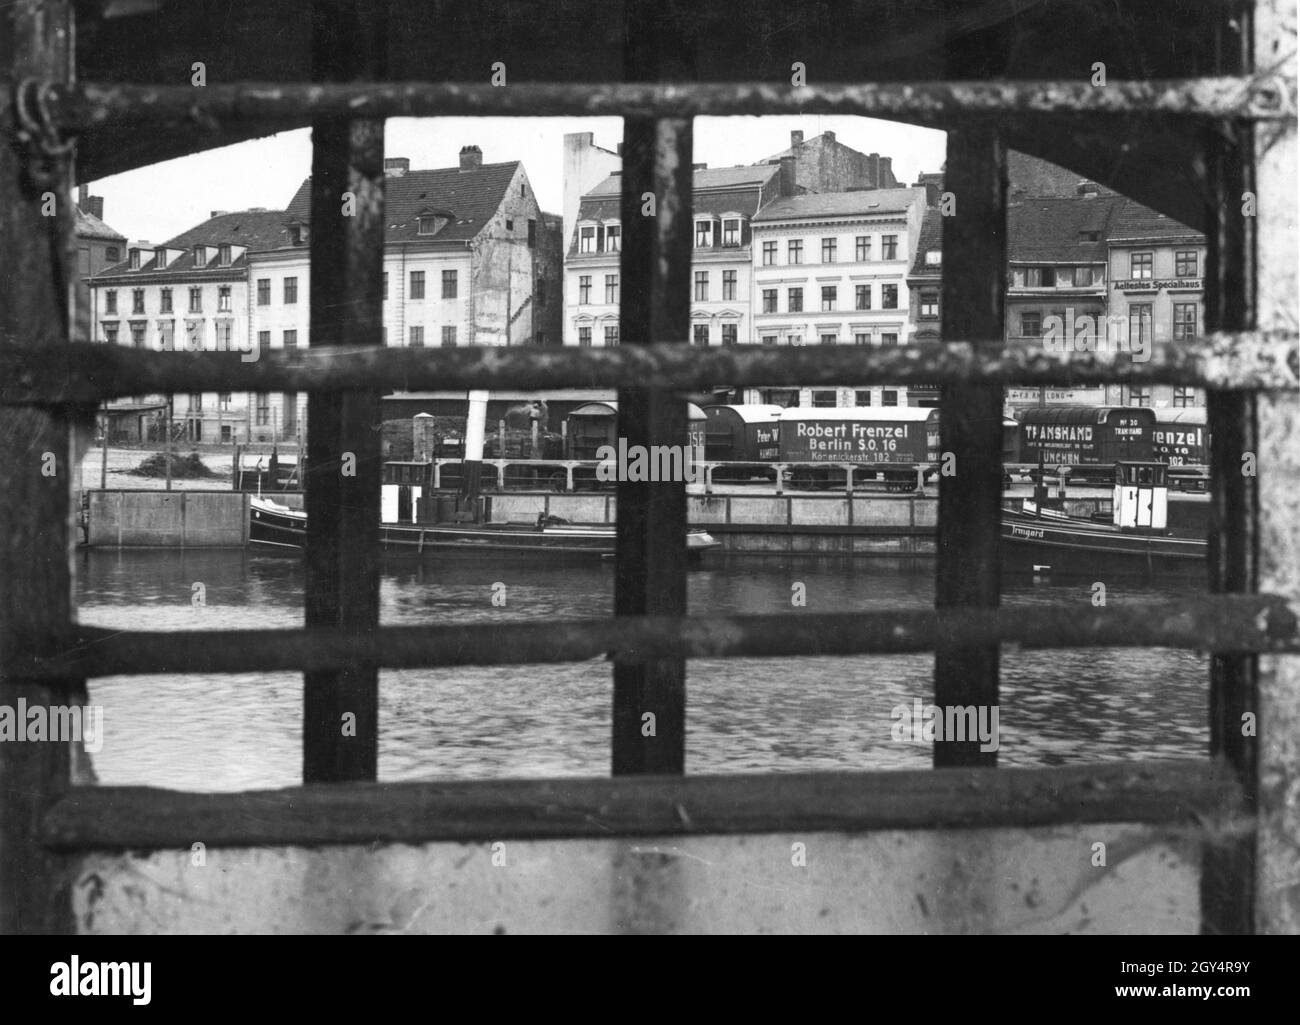 This photograph was taken in 1934 through a barred window in a former prison that stood on the alley Am Krögel in Berlin-Mitte. The view is across the Spree River to the opposite bank. [automated translation] Stock Photo